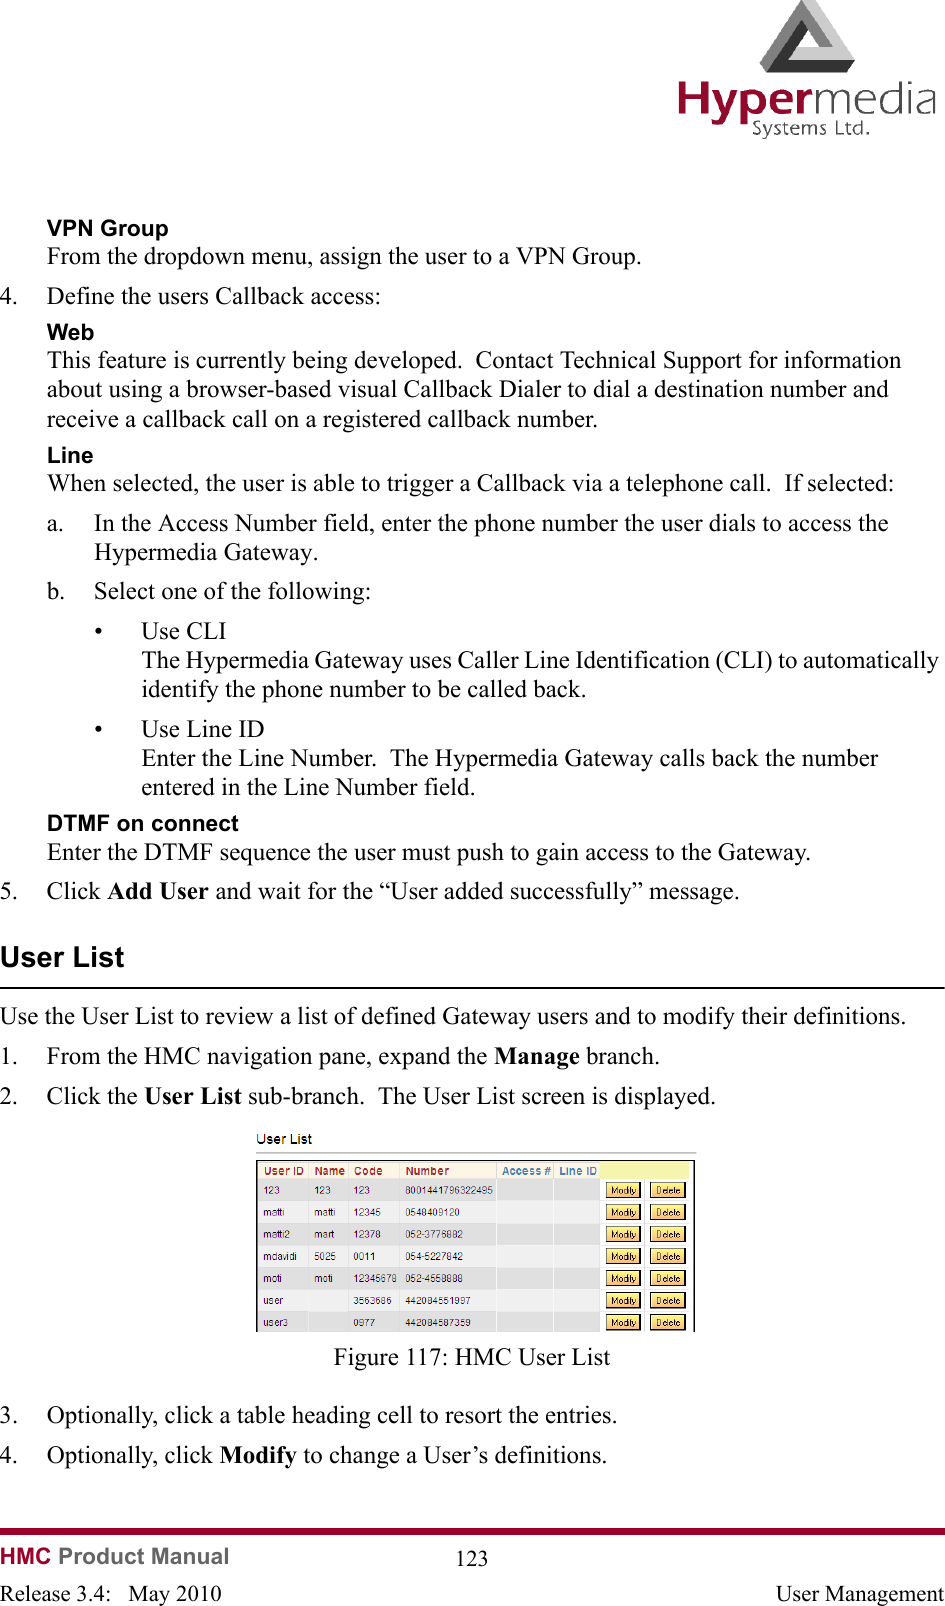 HMC Product Manual  123Release 3.4:   May 2010 User ManagementVPN GroupFrom the dropdown menu, assign the user to a VPN Group.4. Define the users Callback access:WebThis feature is currently being developed.  Contact Technical Support for information about using a browser-based visual Callback Dialer to dial a destination number and receive a callback call on a registered callback number.LineWhen selected, the user is able to trigger a Callback via a telephone call.  If selected:a. In the Access Number field, enter the phone number the user dials to access the Hypermedia Gateway.b. Select one of the following:• Use CLI   The Hypermedia Gateway uses Caller Line Identification (CLI) to automatically identify the phone number to be called back.  • Use Line ID  Enter the Line Number.  The Hypermedia Gateway calls back the number entered in the Line Number field.DTMF on connectEnter the DTMF sequence the user must push to gain access to the Gateway.5. Click Add User and wait for the “User added successfully” message.  User ListUse the User List to review a list of defined Gateway users and to modify their definitions.1. From the HMC navigation pane, expand the Manage branch.2. Click the User List sub-branch.  The User List screen is displayed.              Figure 117: HMC User List3. Optionally, click a table heading cell to resort the entries.4. Optionally, click Modify to change a User’s definitions.